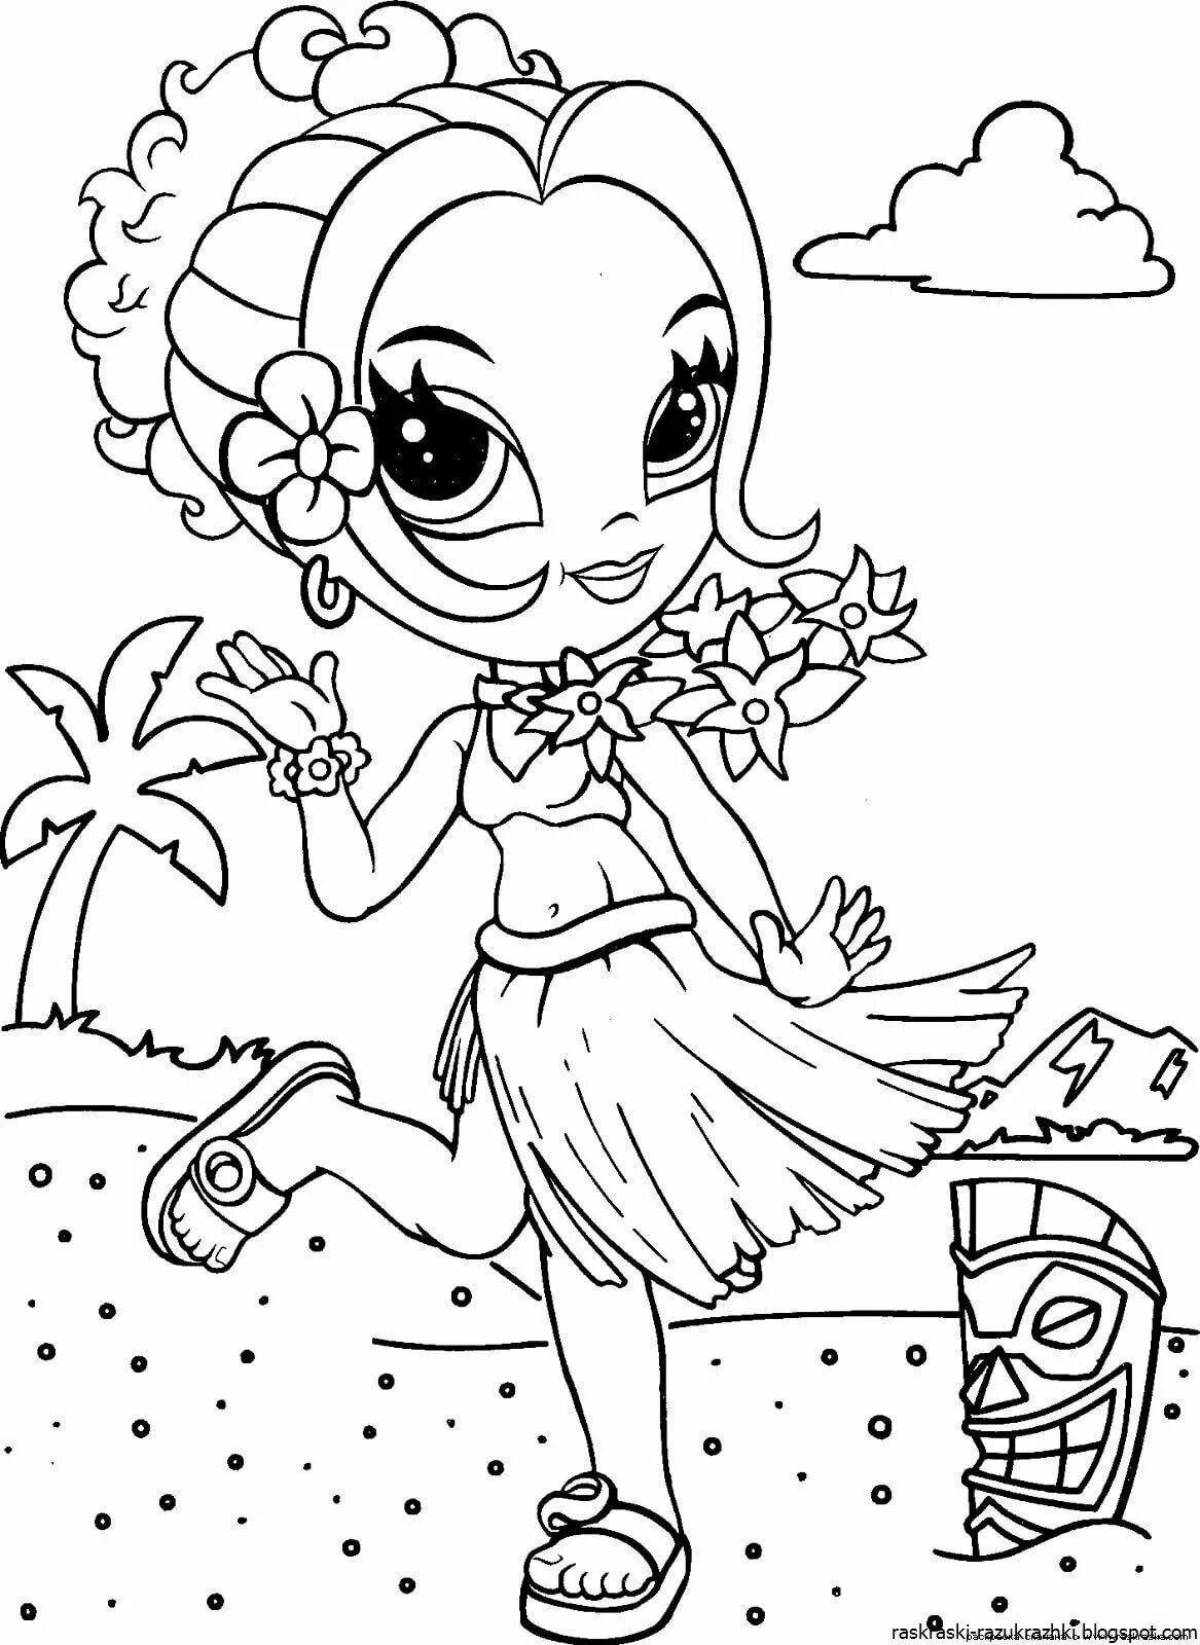 Live coloring for girls 6-7 years old